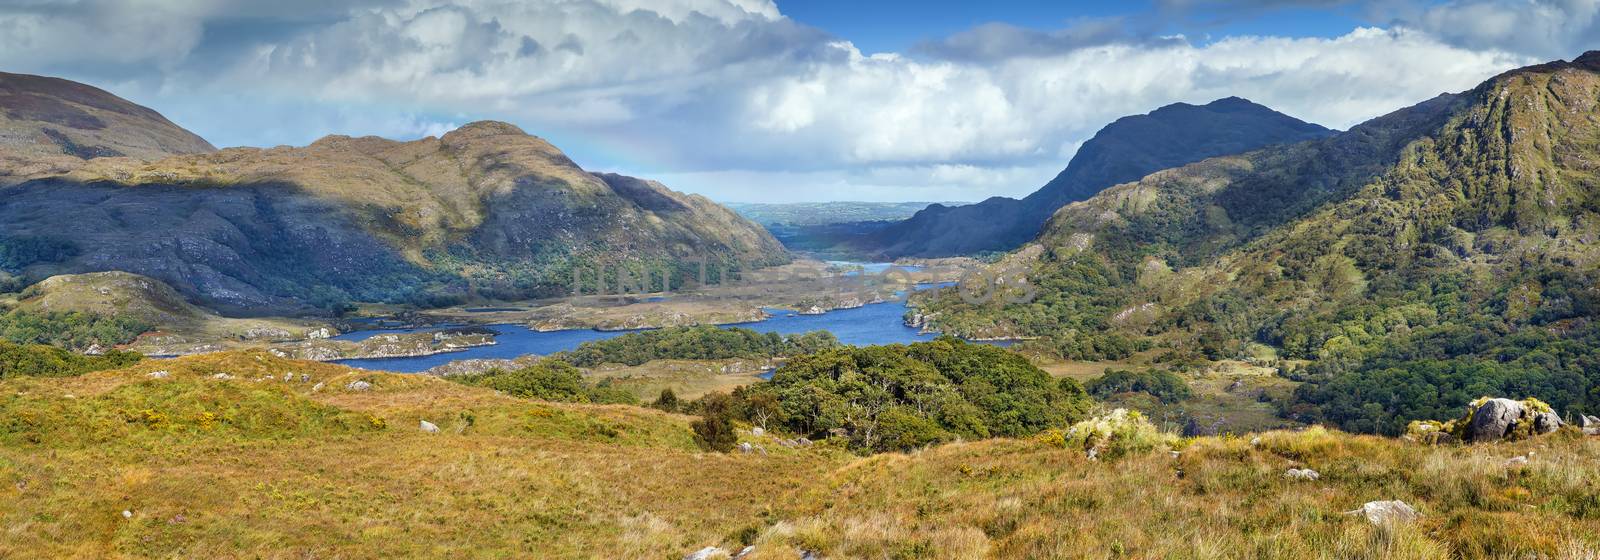 Panoramic landscape from Ladies View is a scenic viewpoint on the Ring of Kerry tourist route. Ireland